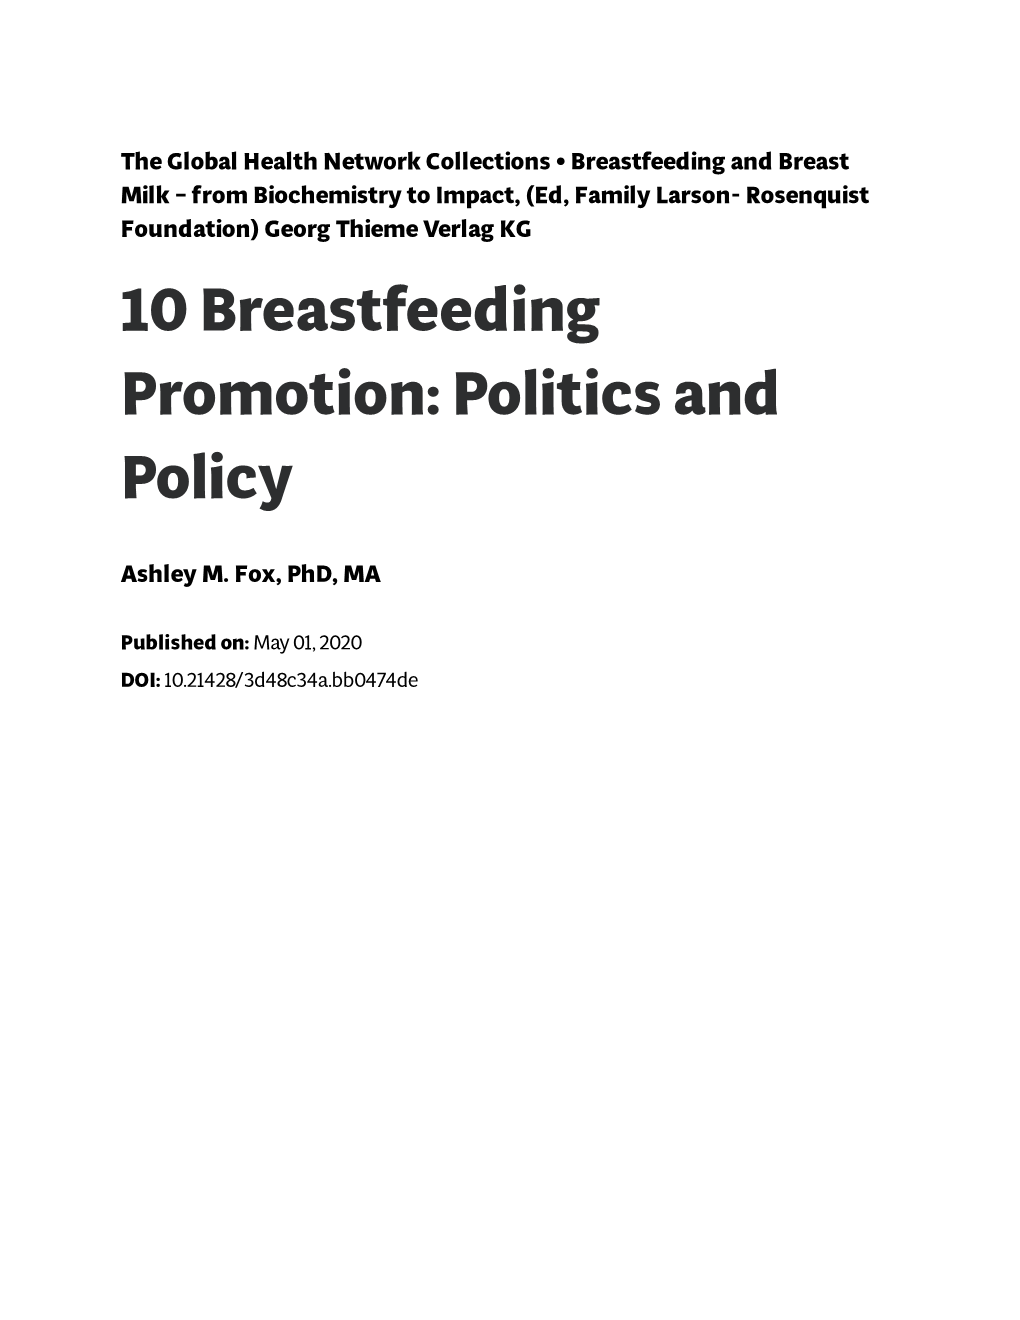 10 Breastfeeding Promotion: Politics and Policy